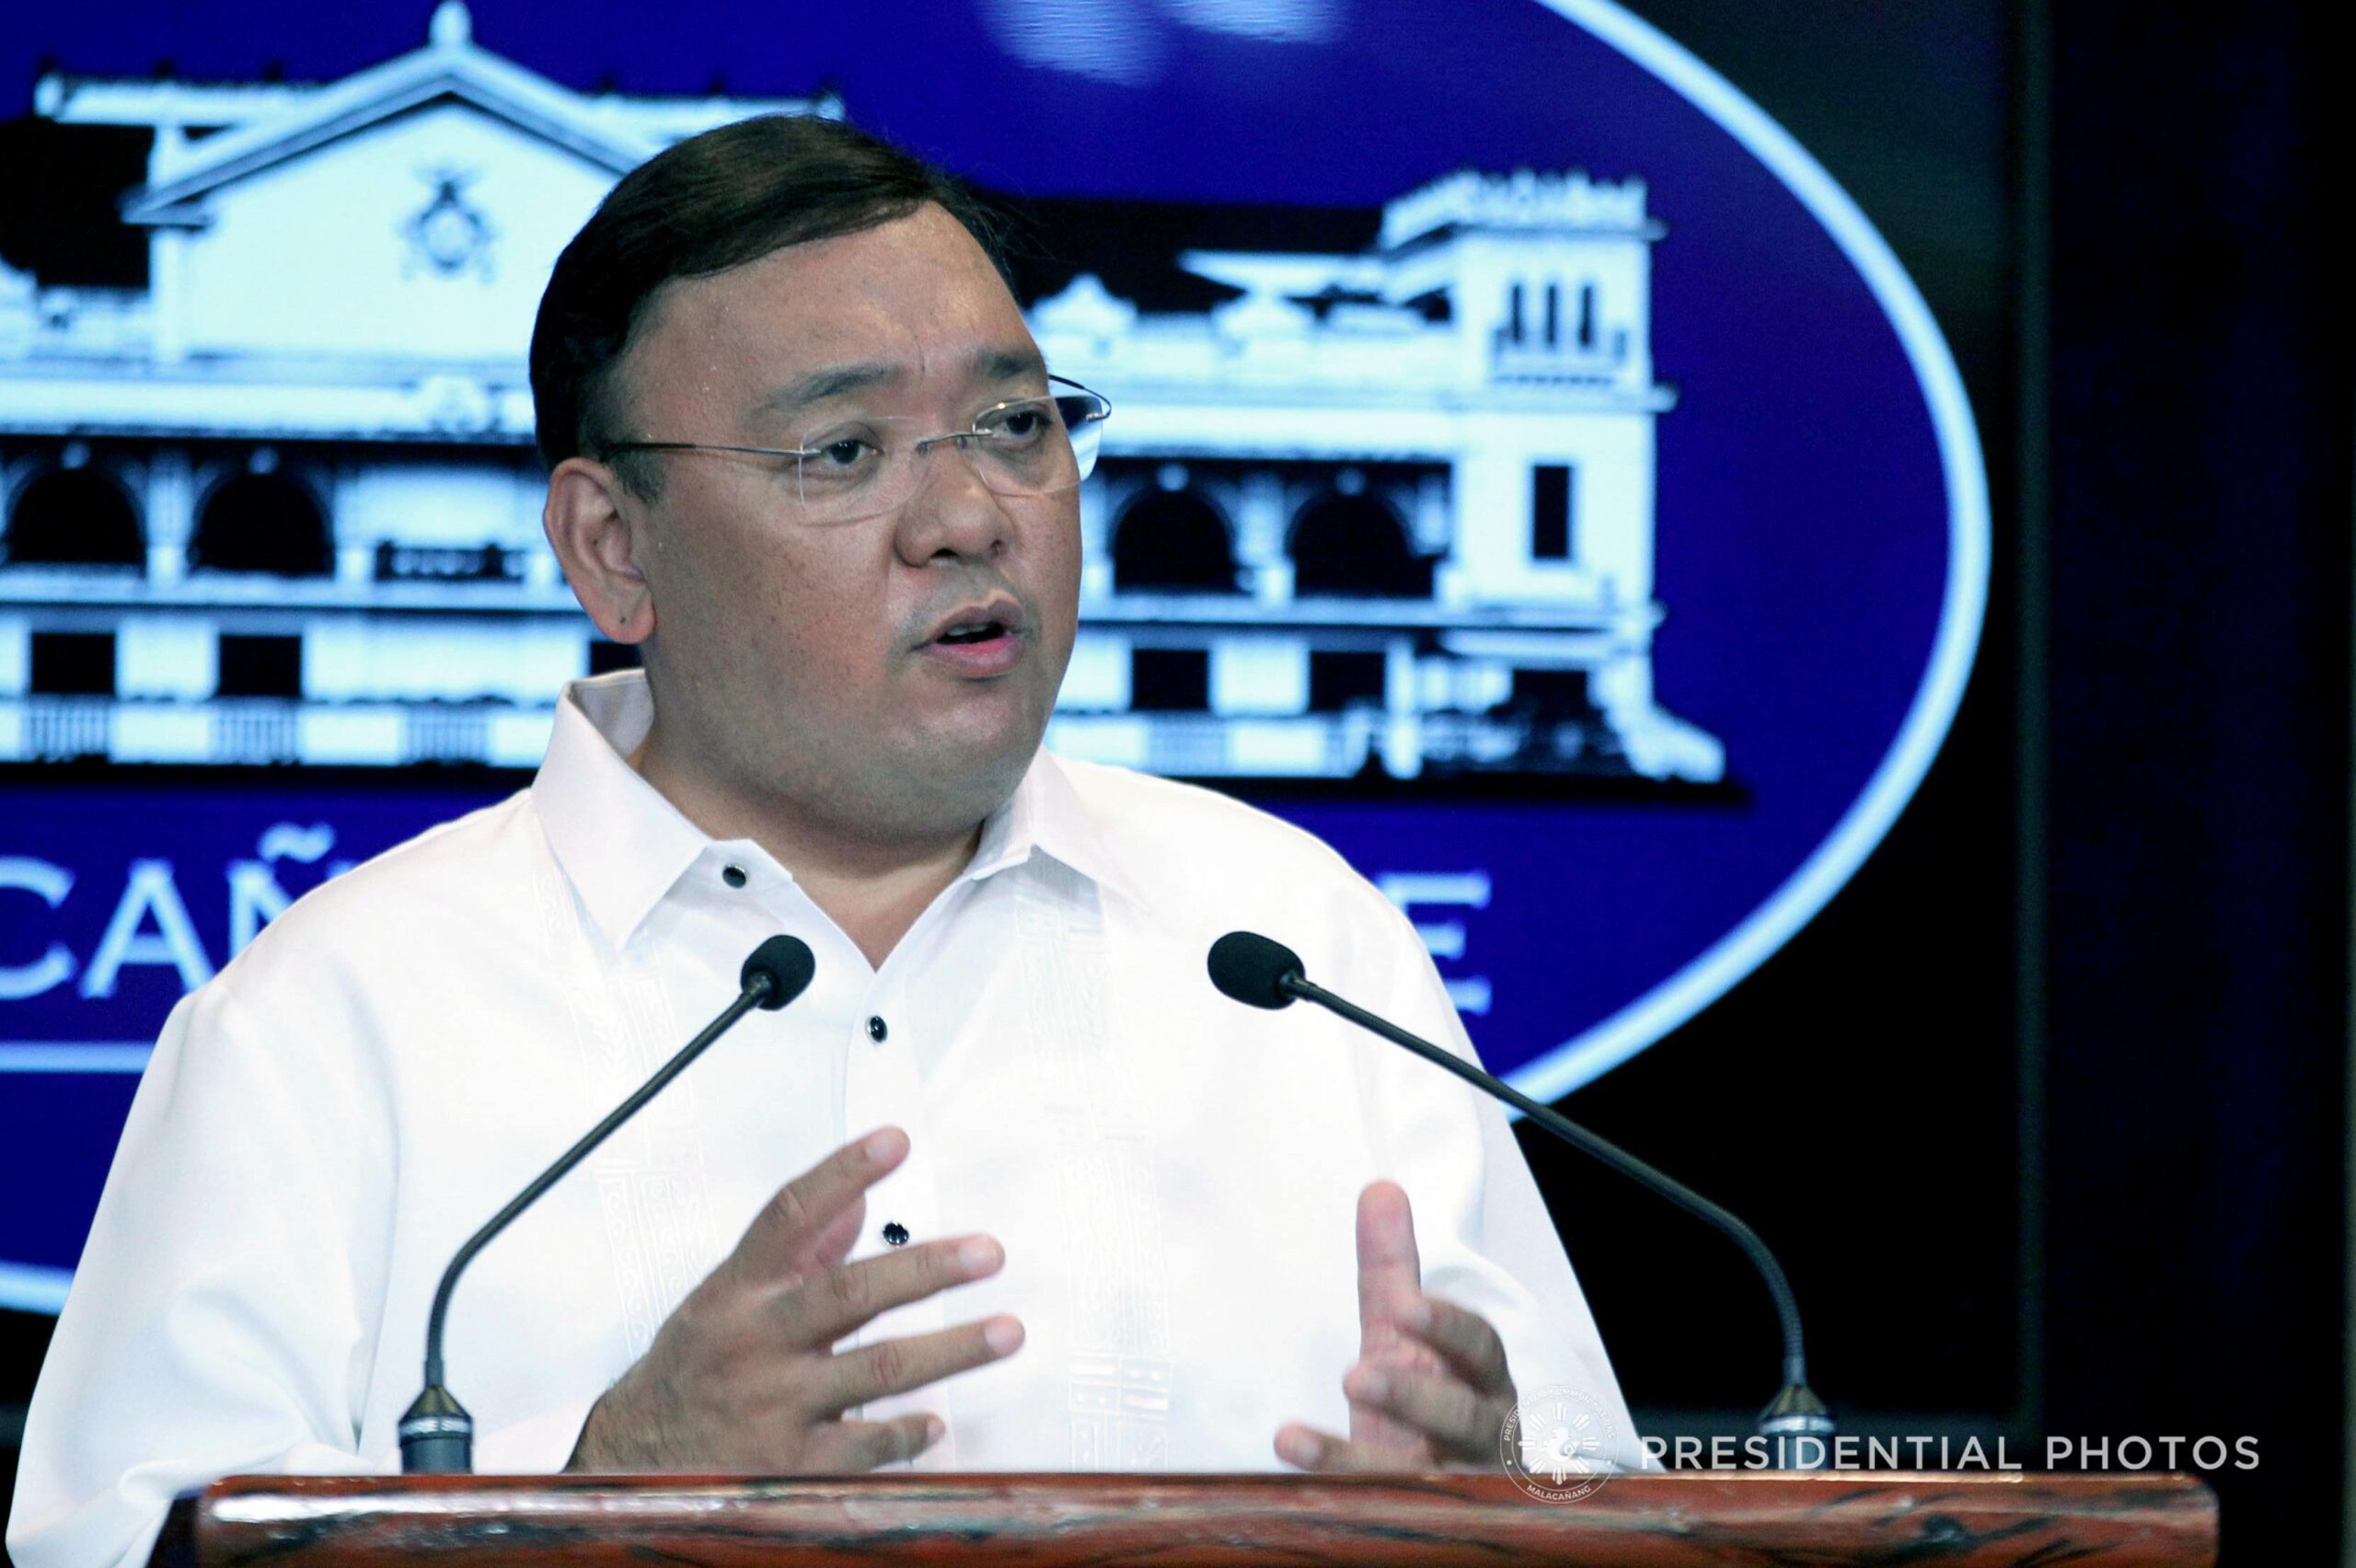 Roque appeals to Boracay task force to ease media restrictions